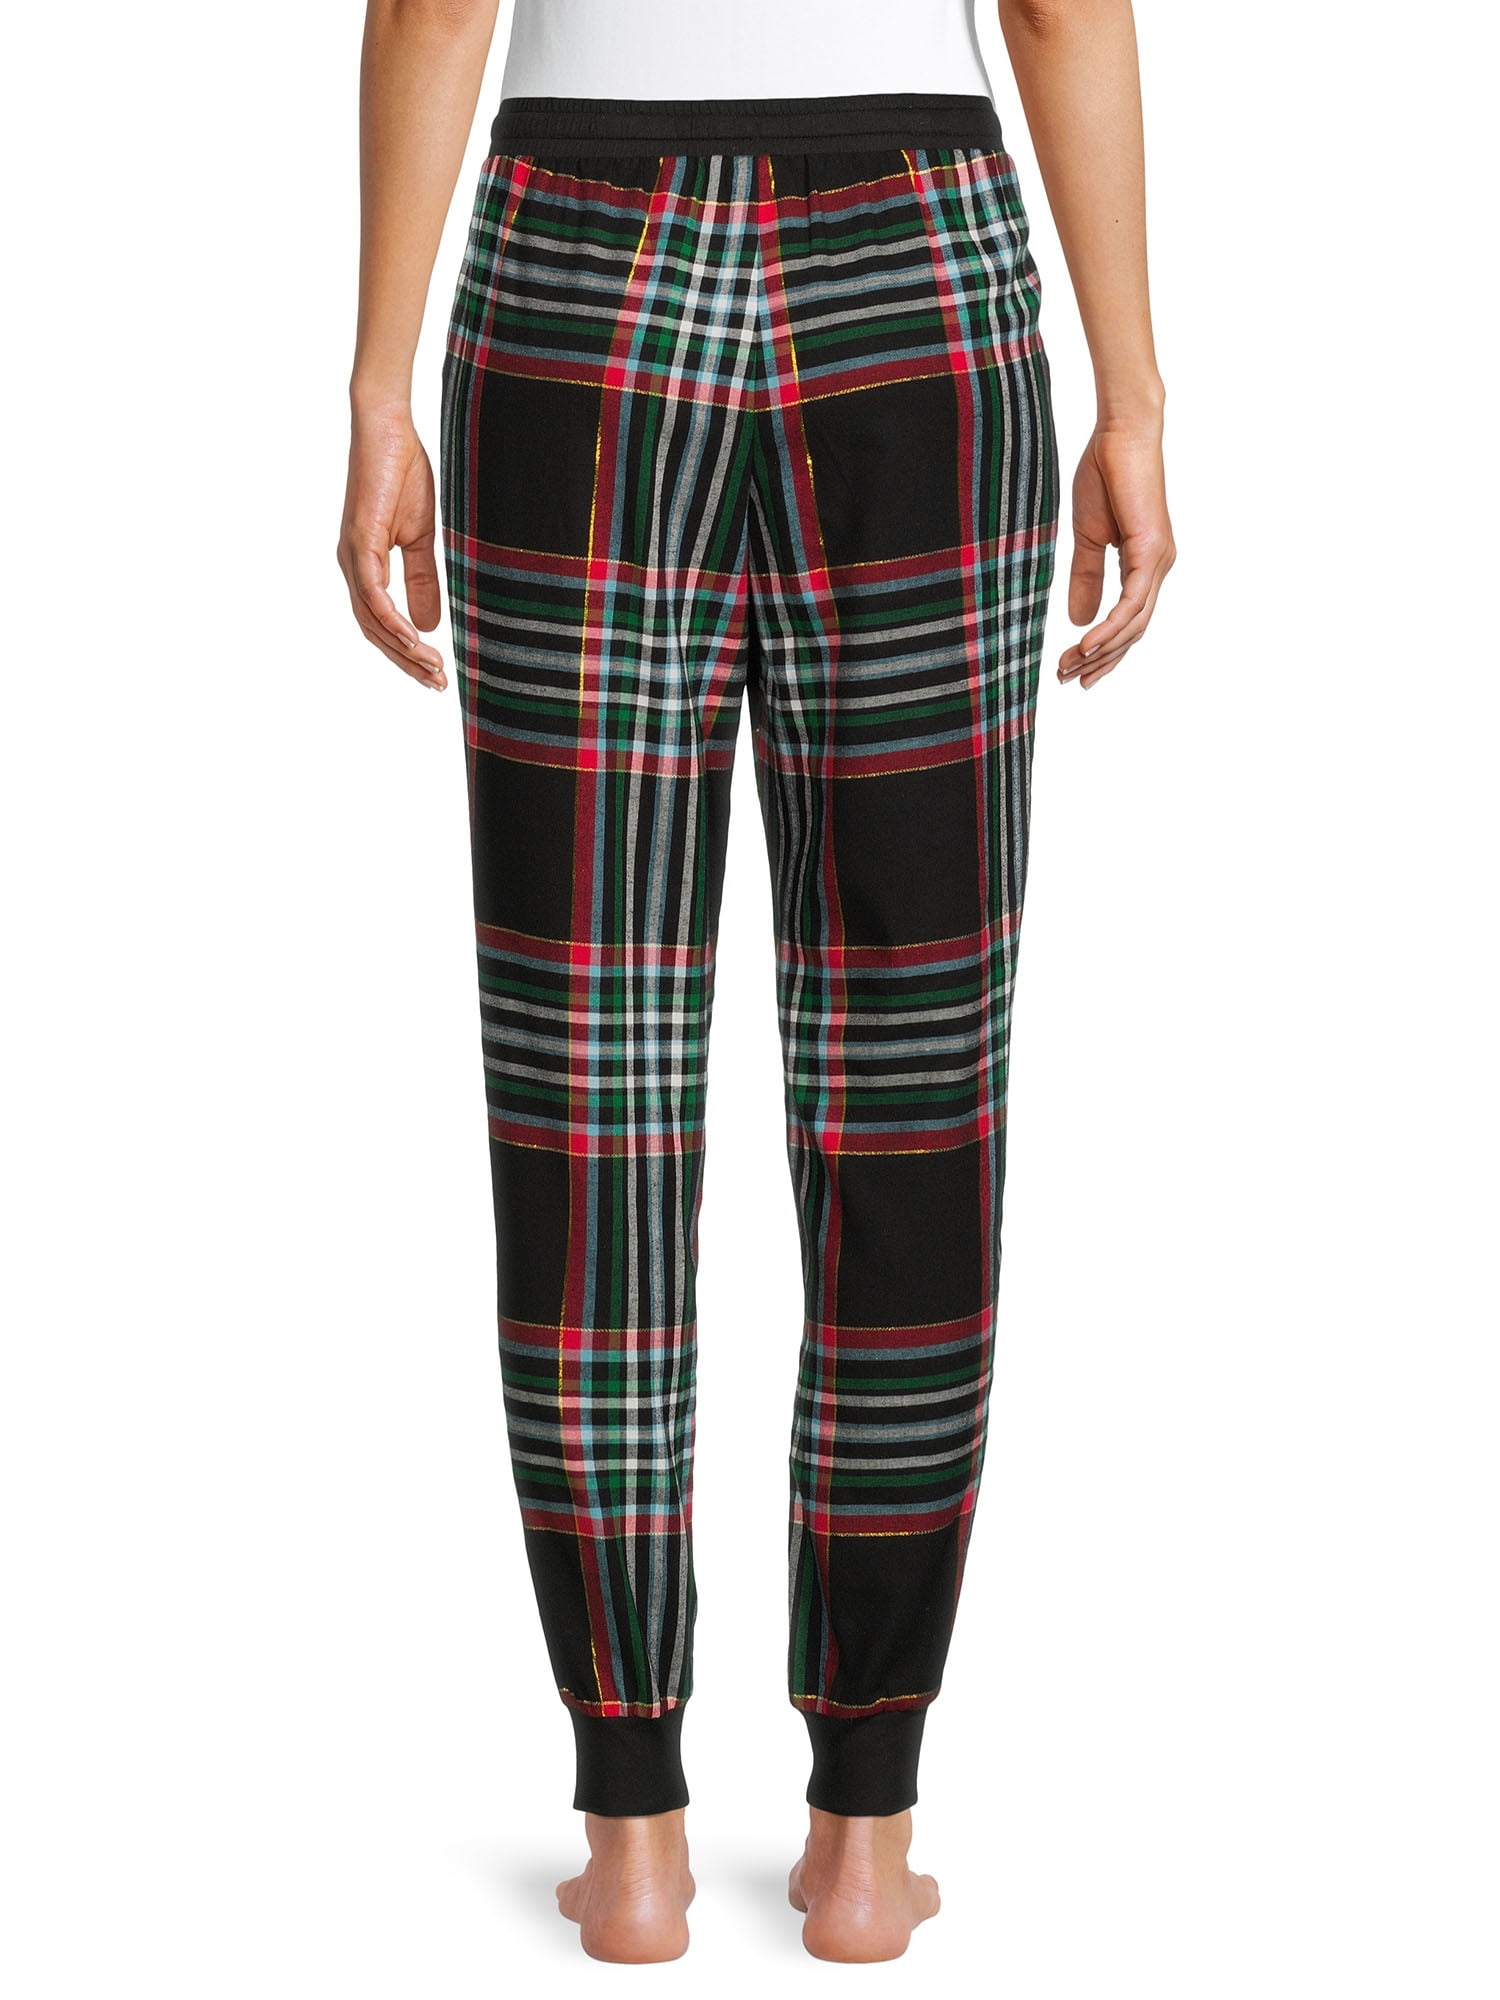 George Women's Flannel Jogger 